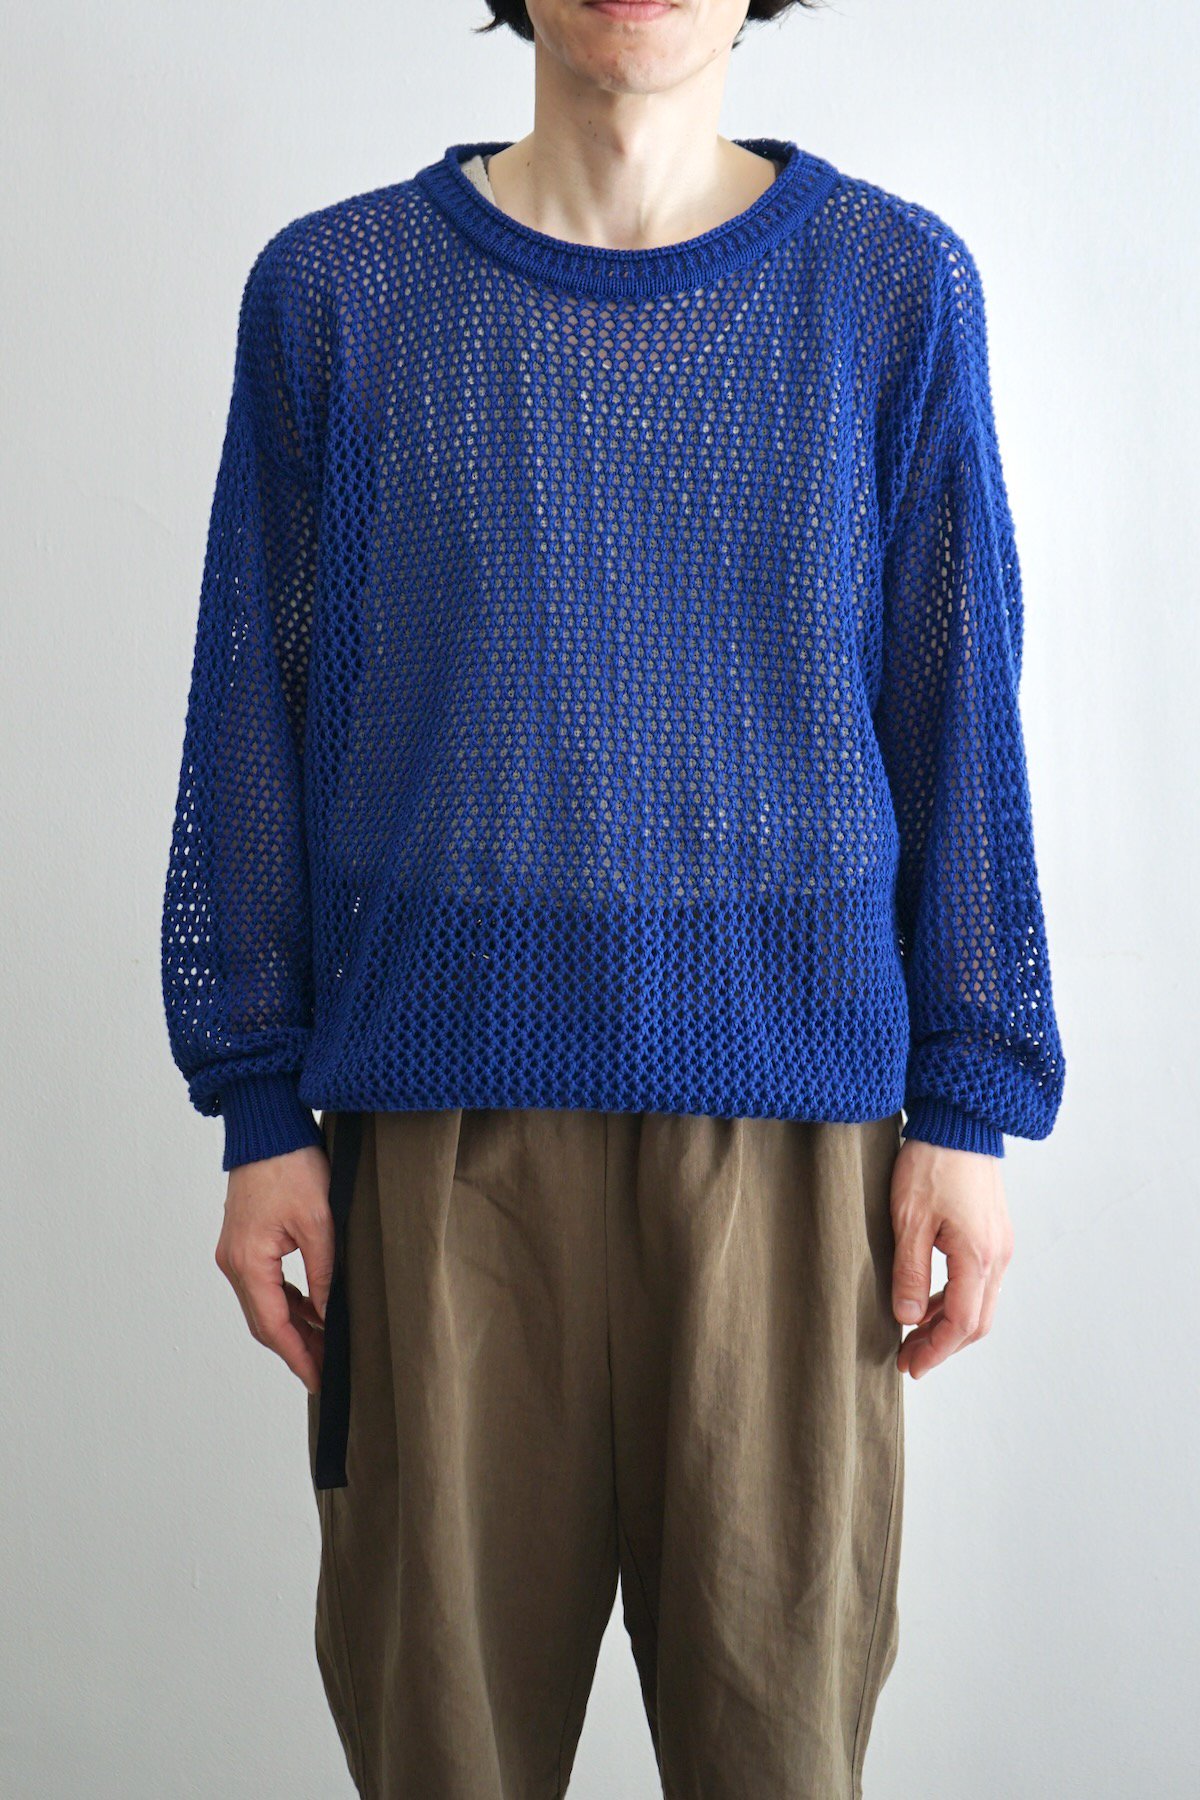 s.k. manor hill / Open Knit Sweater / Royal Blue cotton